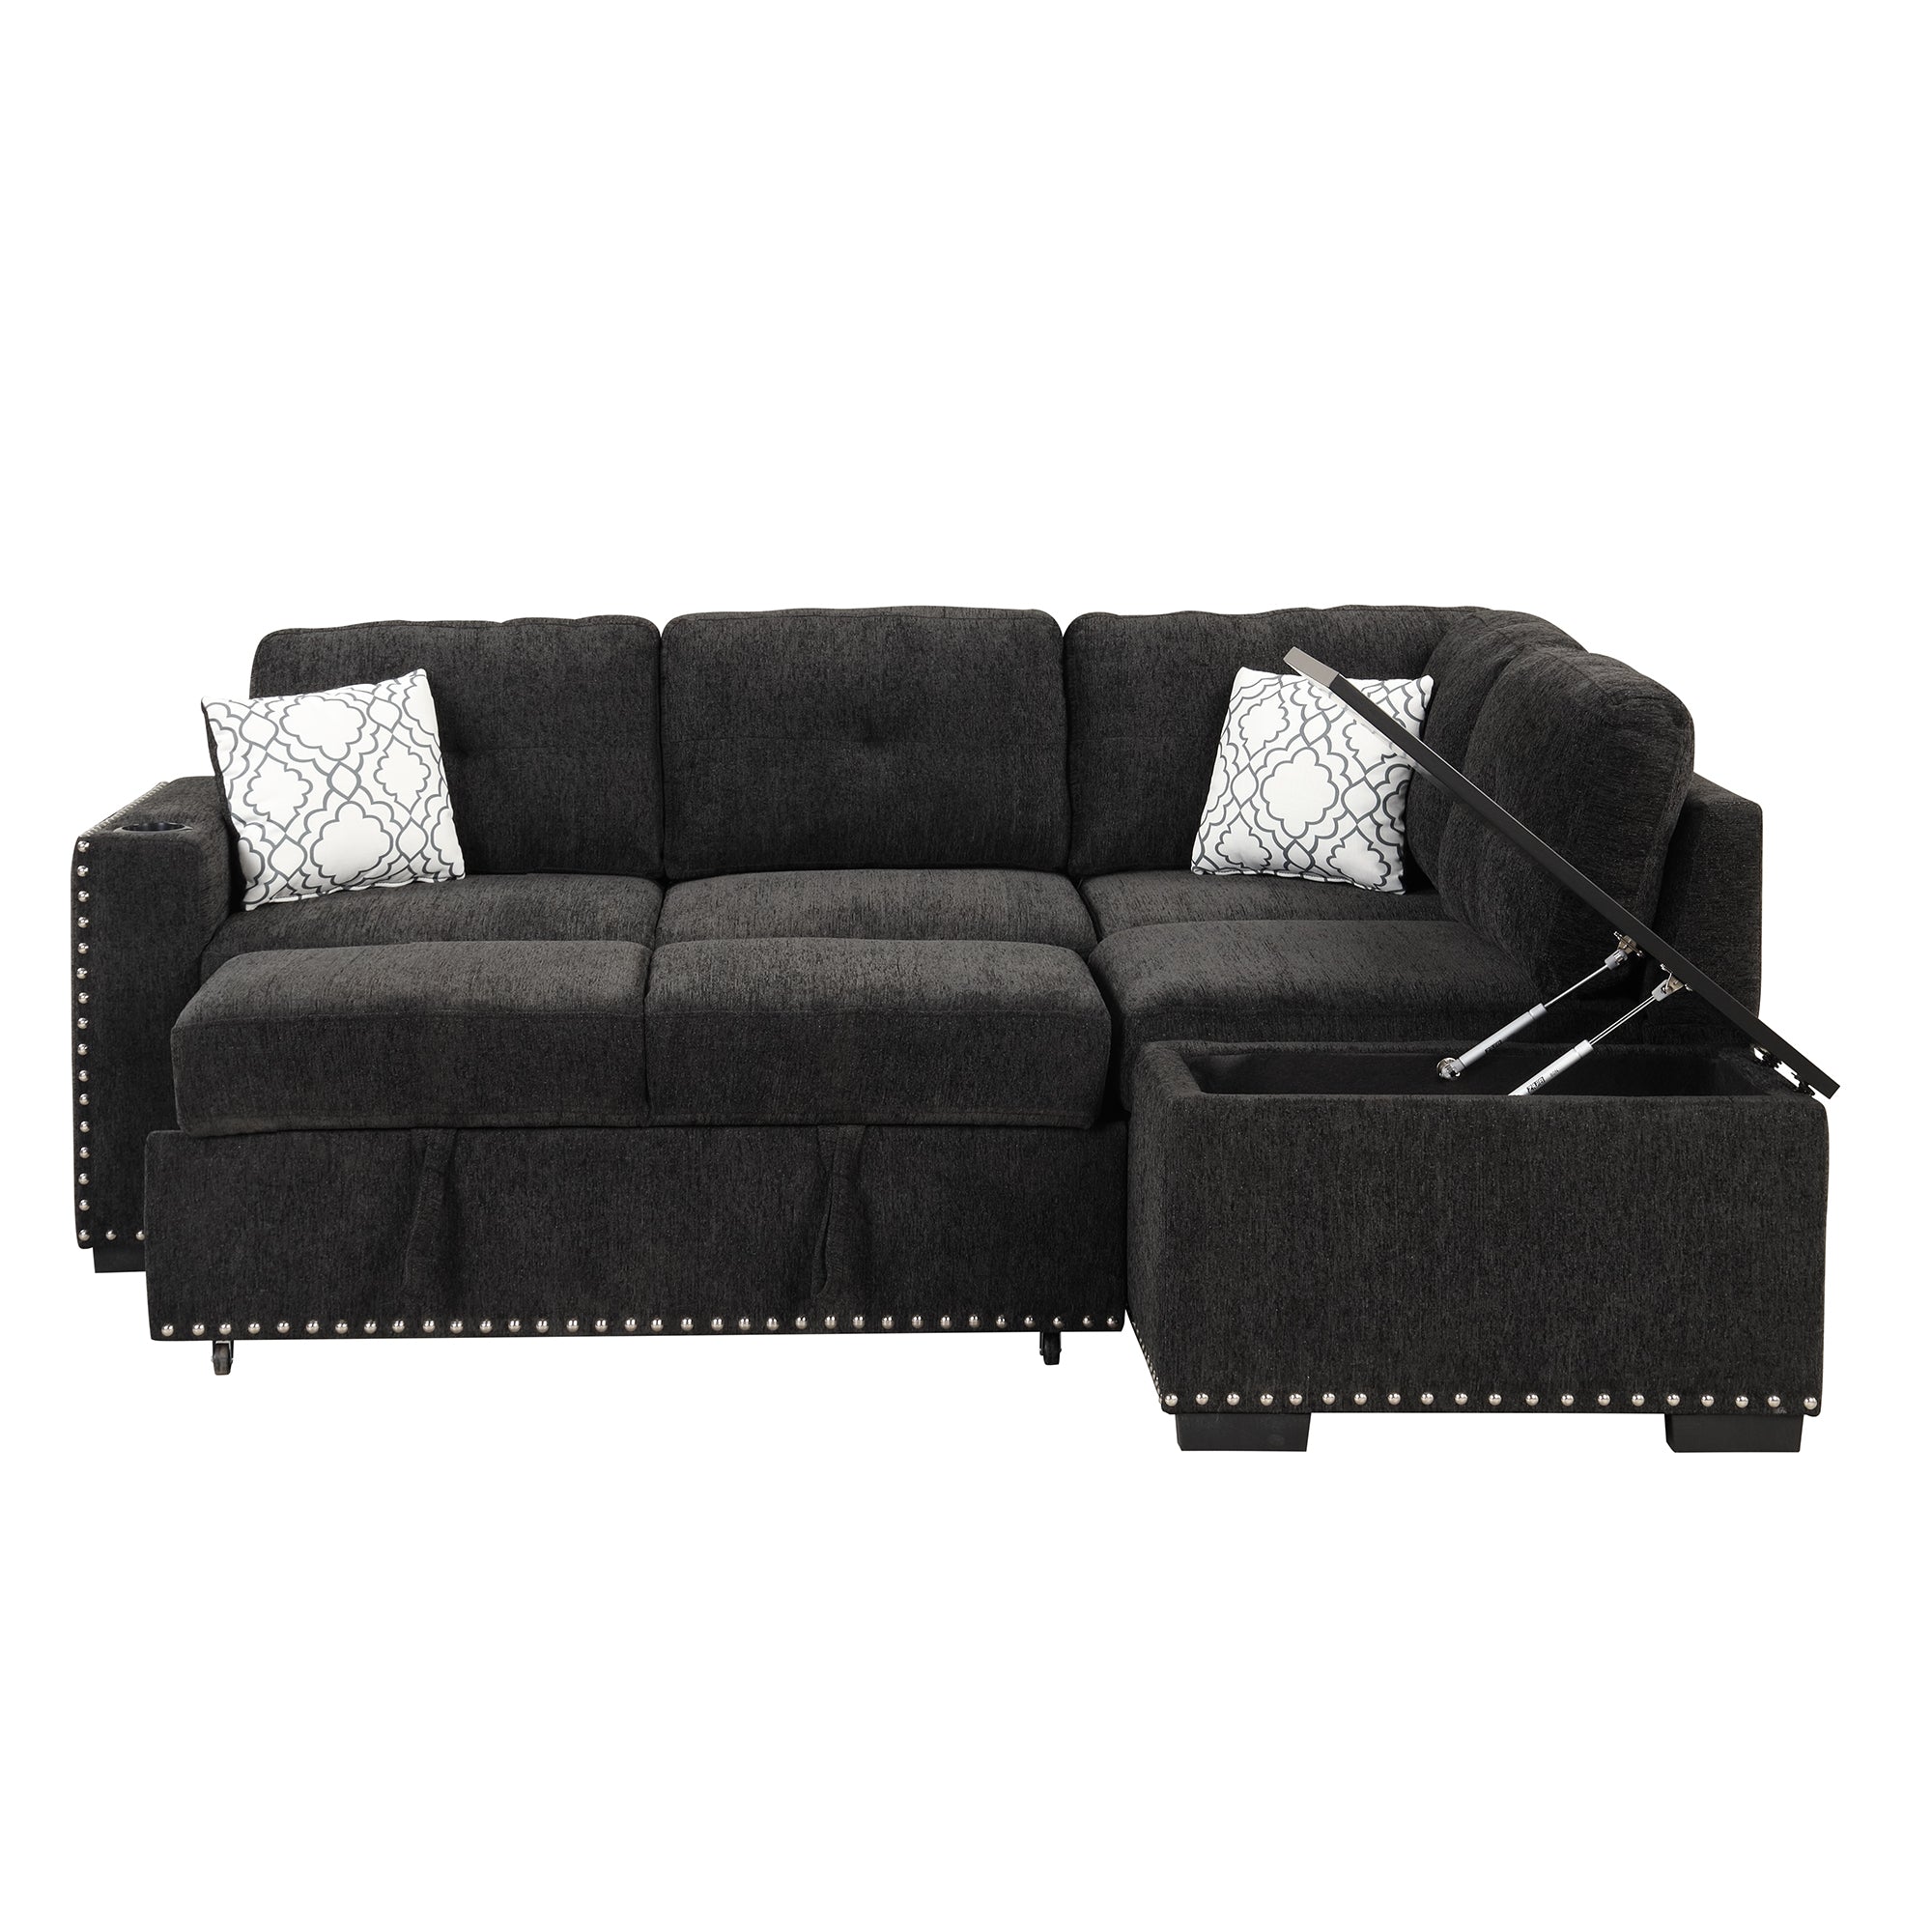 Black Modern L-Shaped Sectional Sofa Bed with Storage, USB & Cup Holder-Sleeper Sectionals-American Furniture Outlet